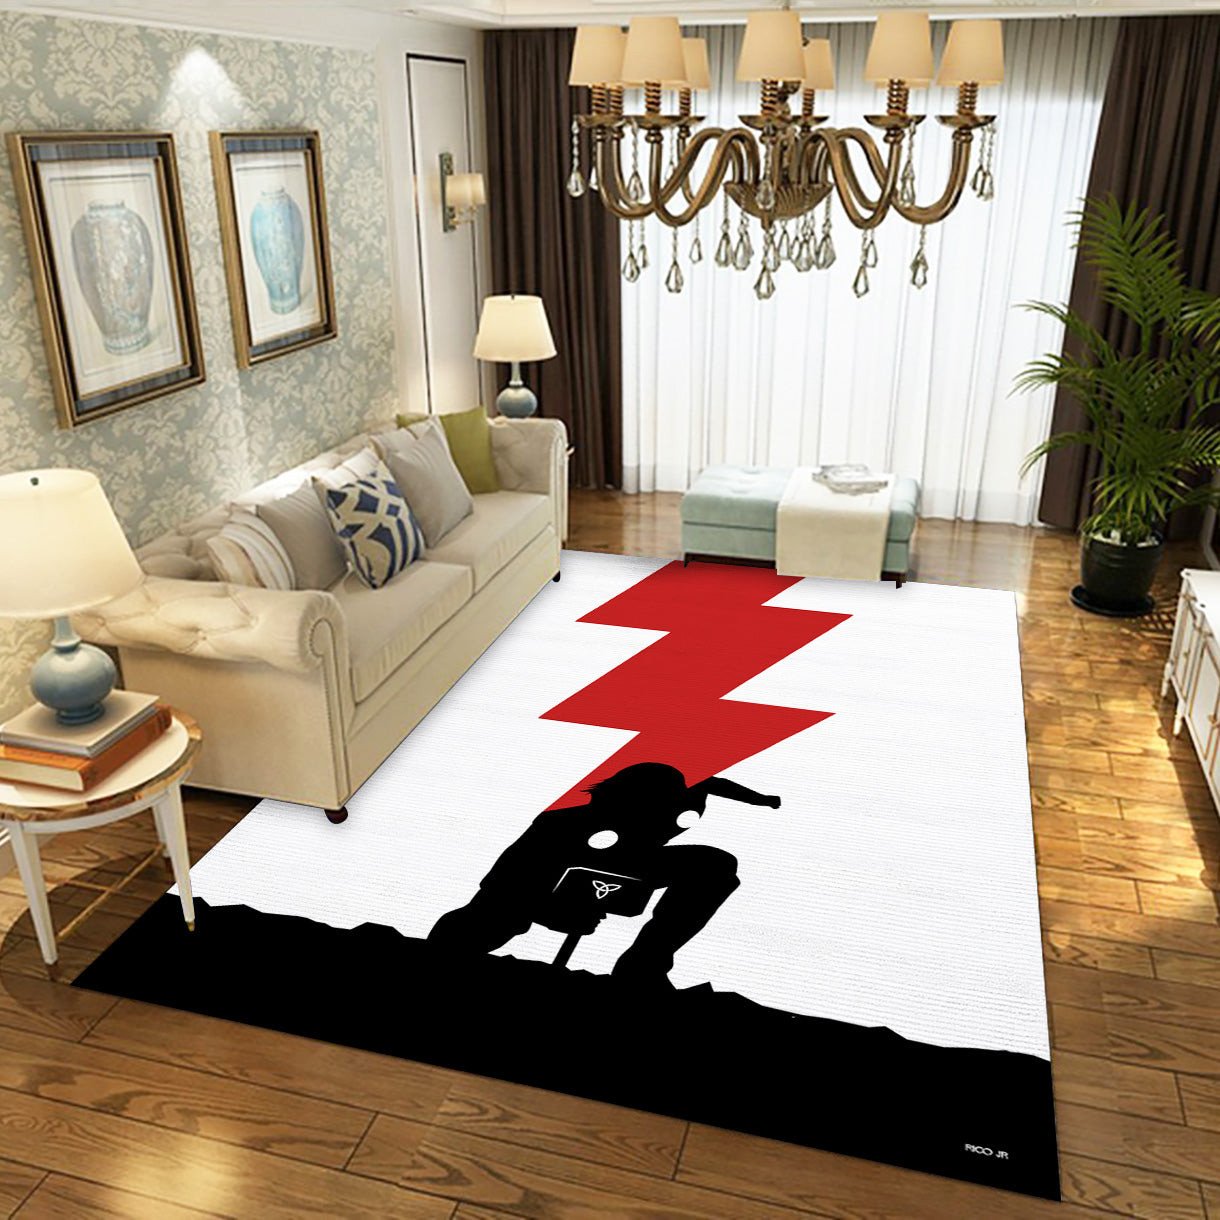 Thor Area Rug, Living Room And Bedroom Rug - Home Decor - Indoor Outdoor Rugs 1